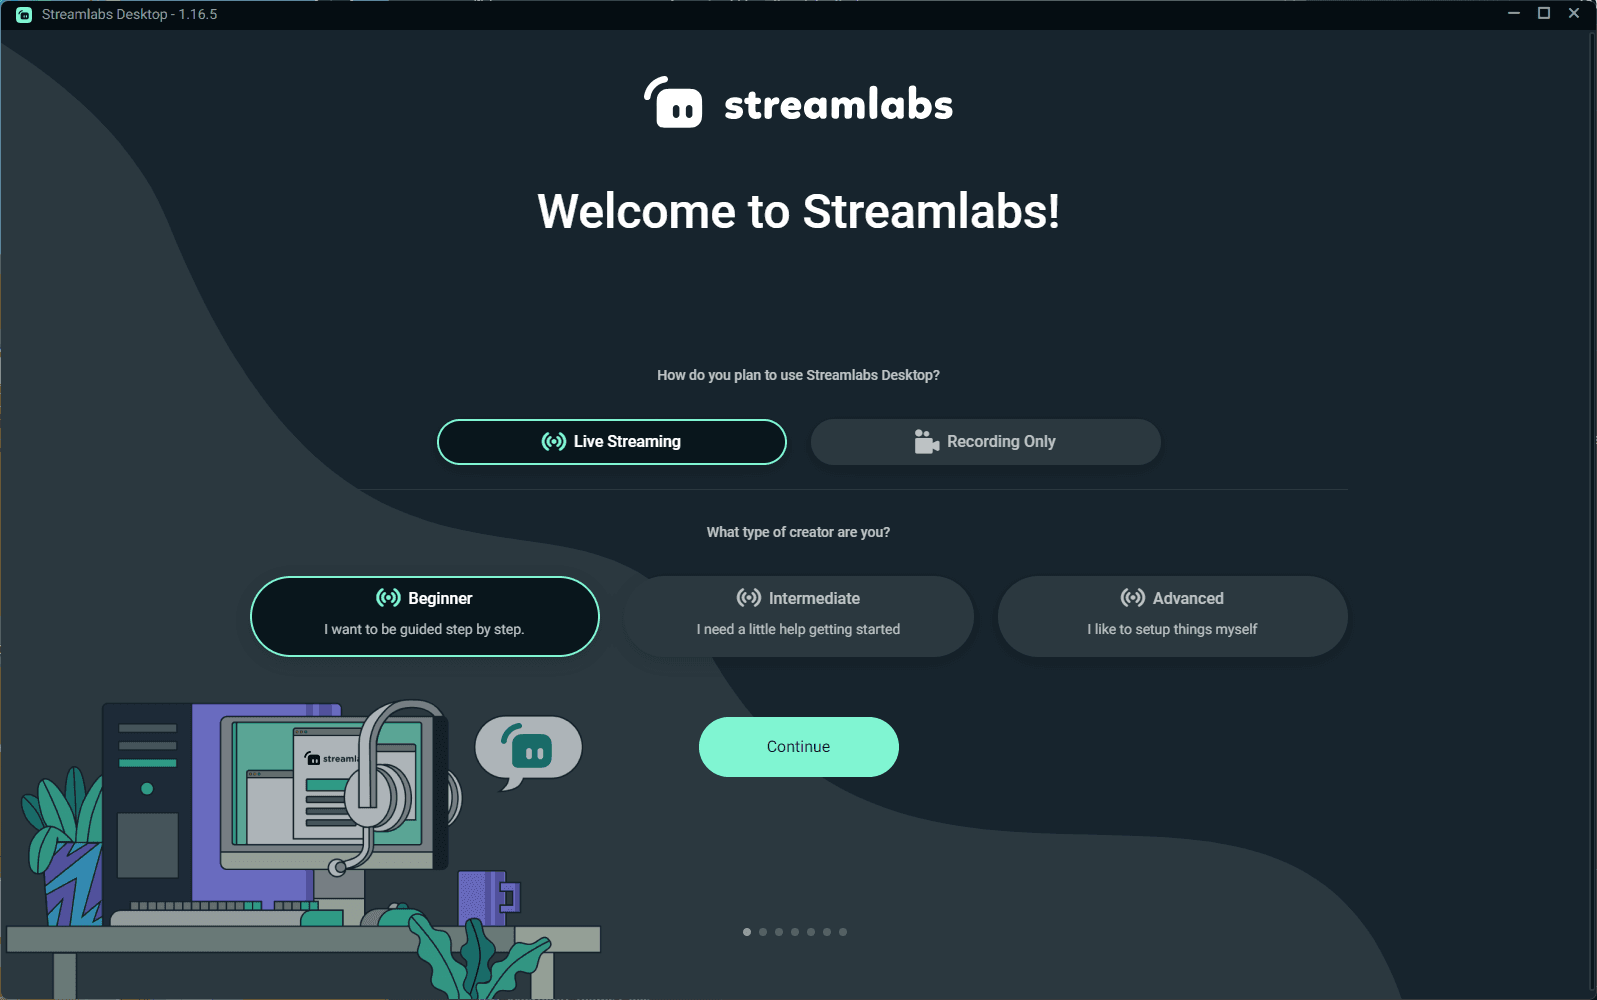 Getting Started With Streamlabs